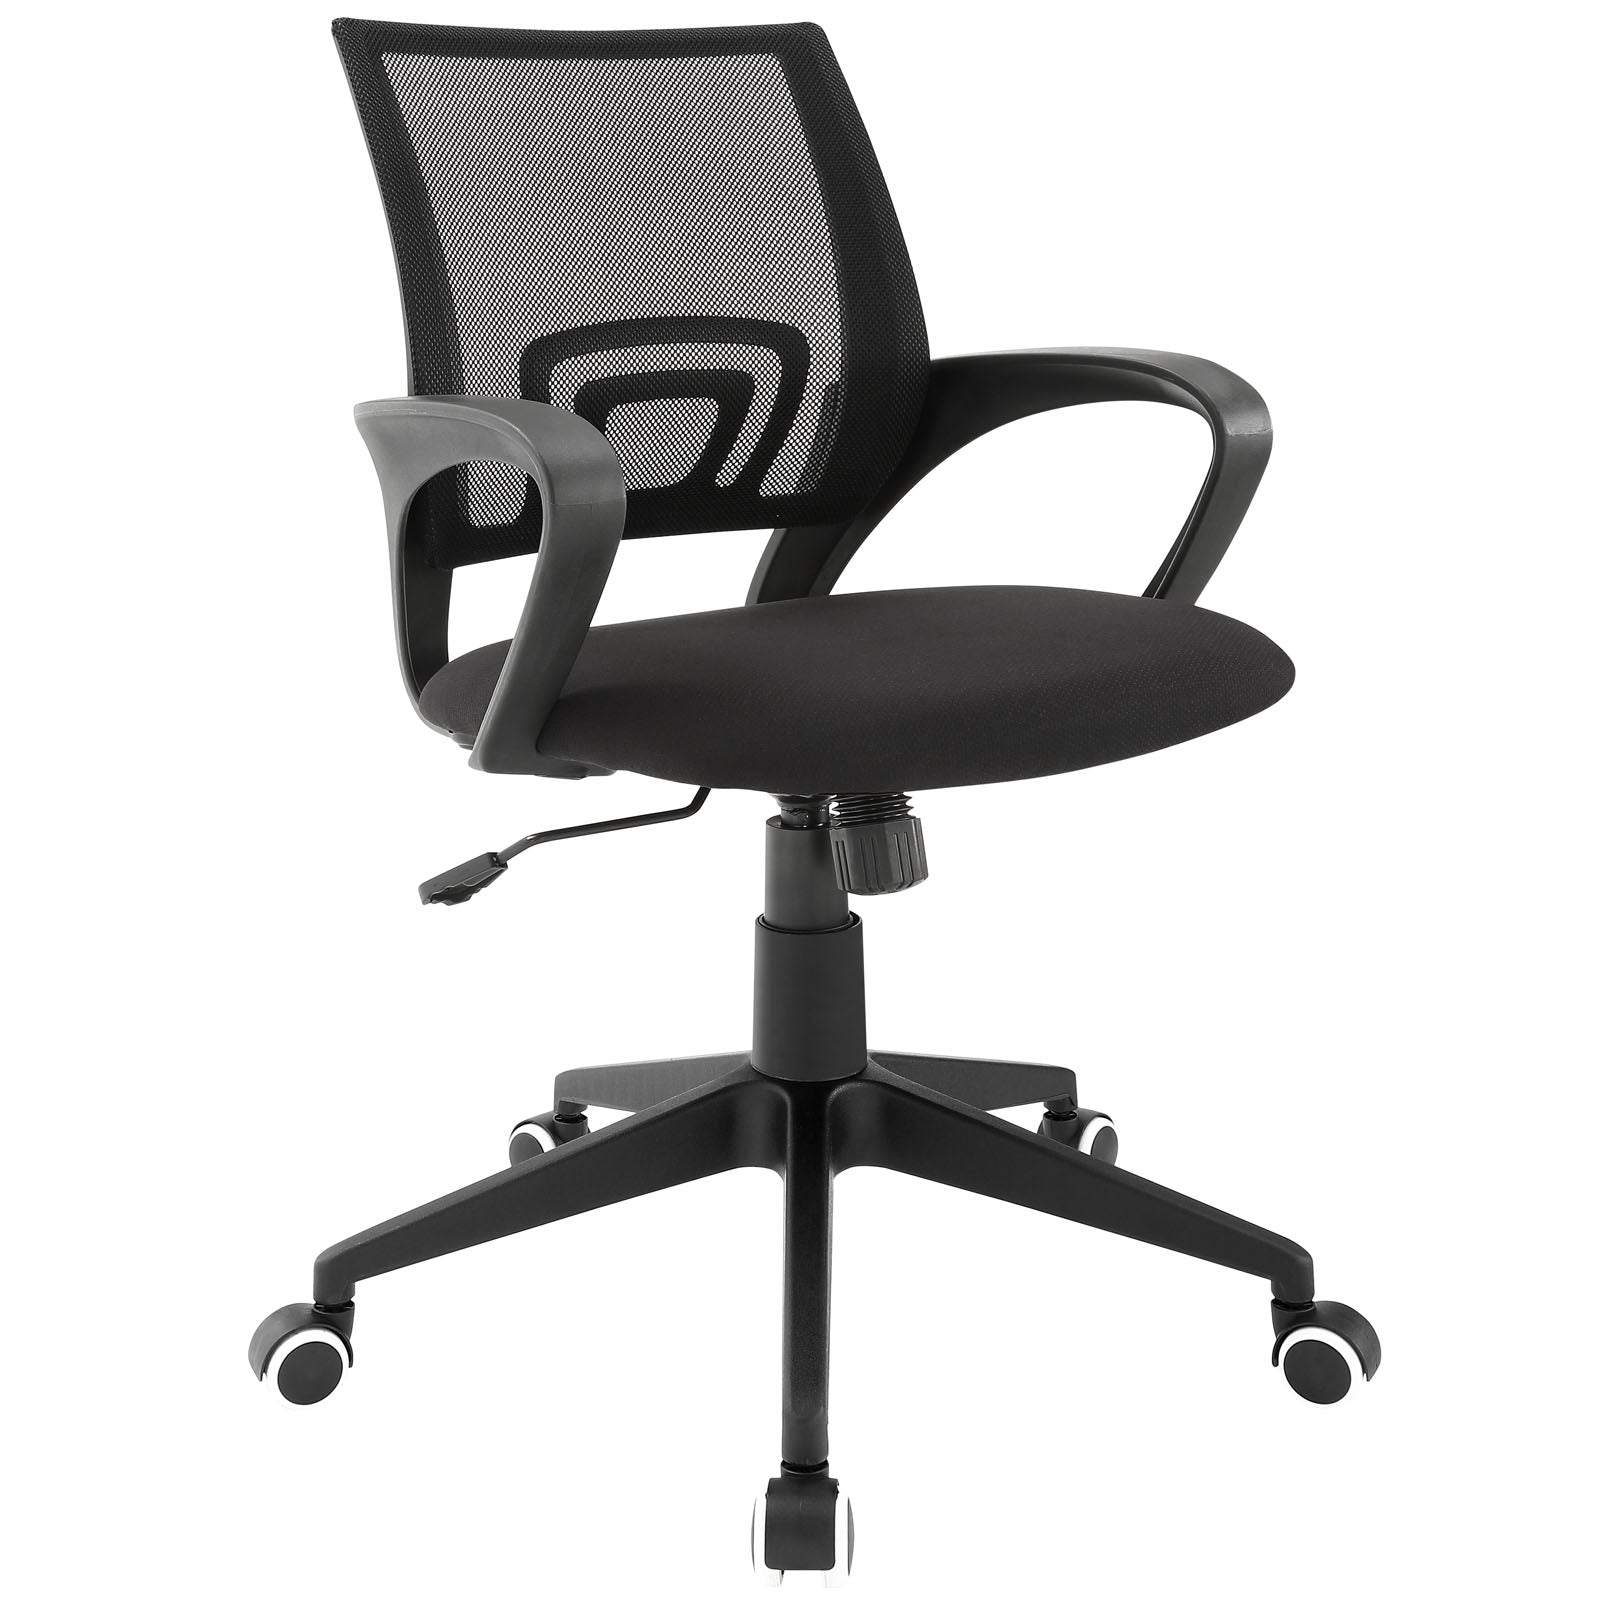 Shop Twilight Office Chair at BUILDMyplace for a Classy Work place